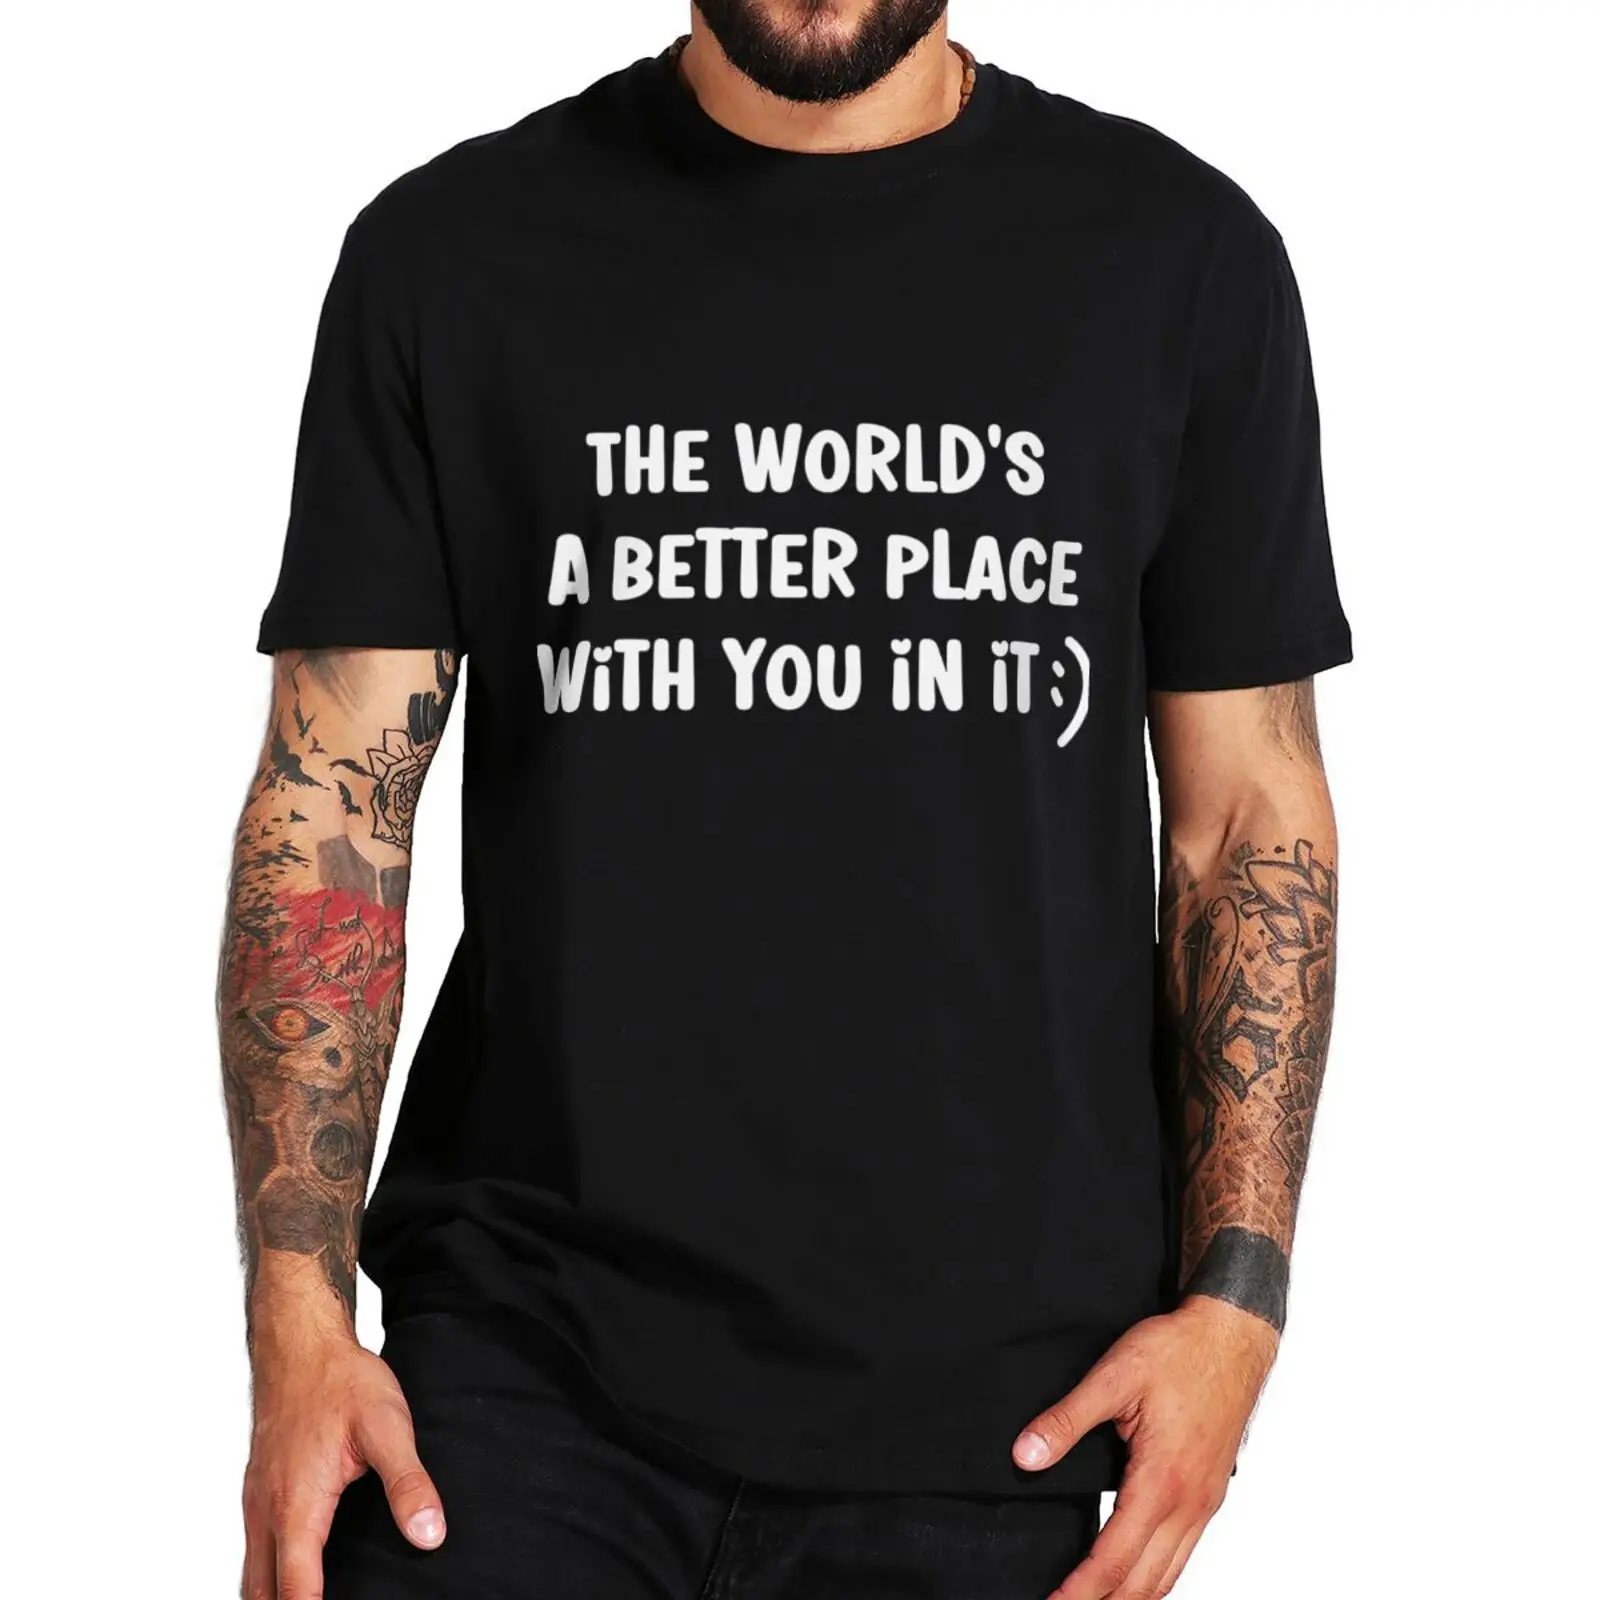 

The World's A Better Place With You In It T-shirt Humor Introverted Depressed Person Gift Tee Cotton Unisex Casual Soft T Shirts